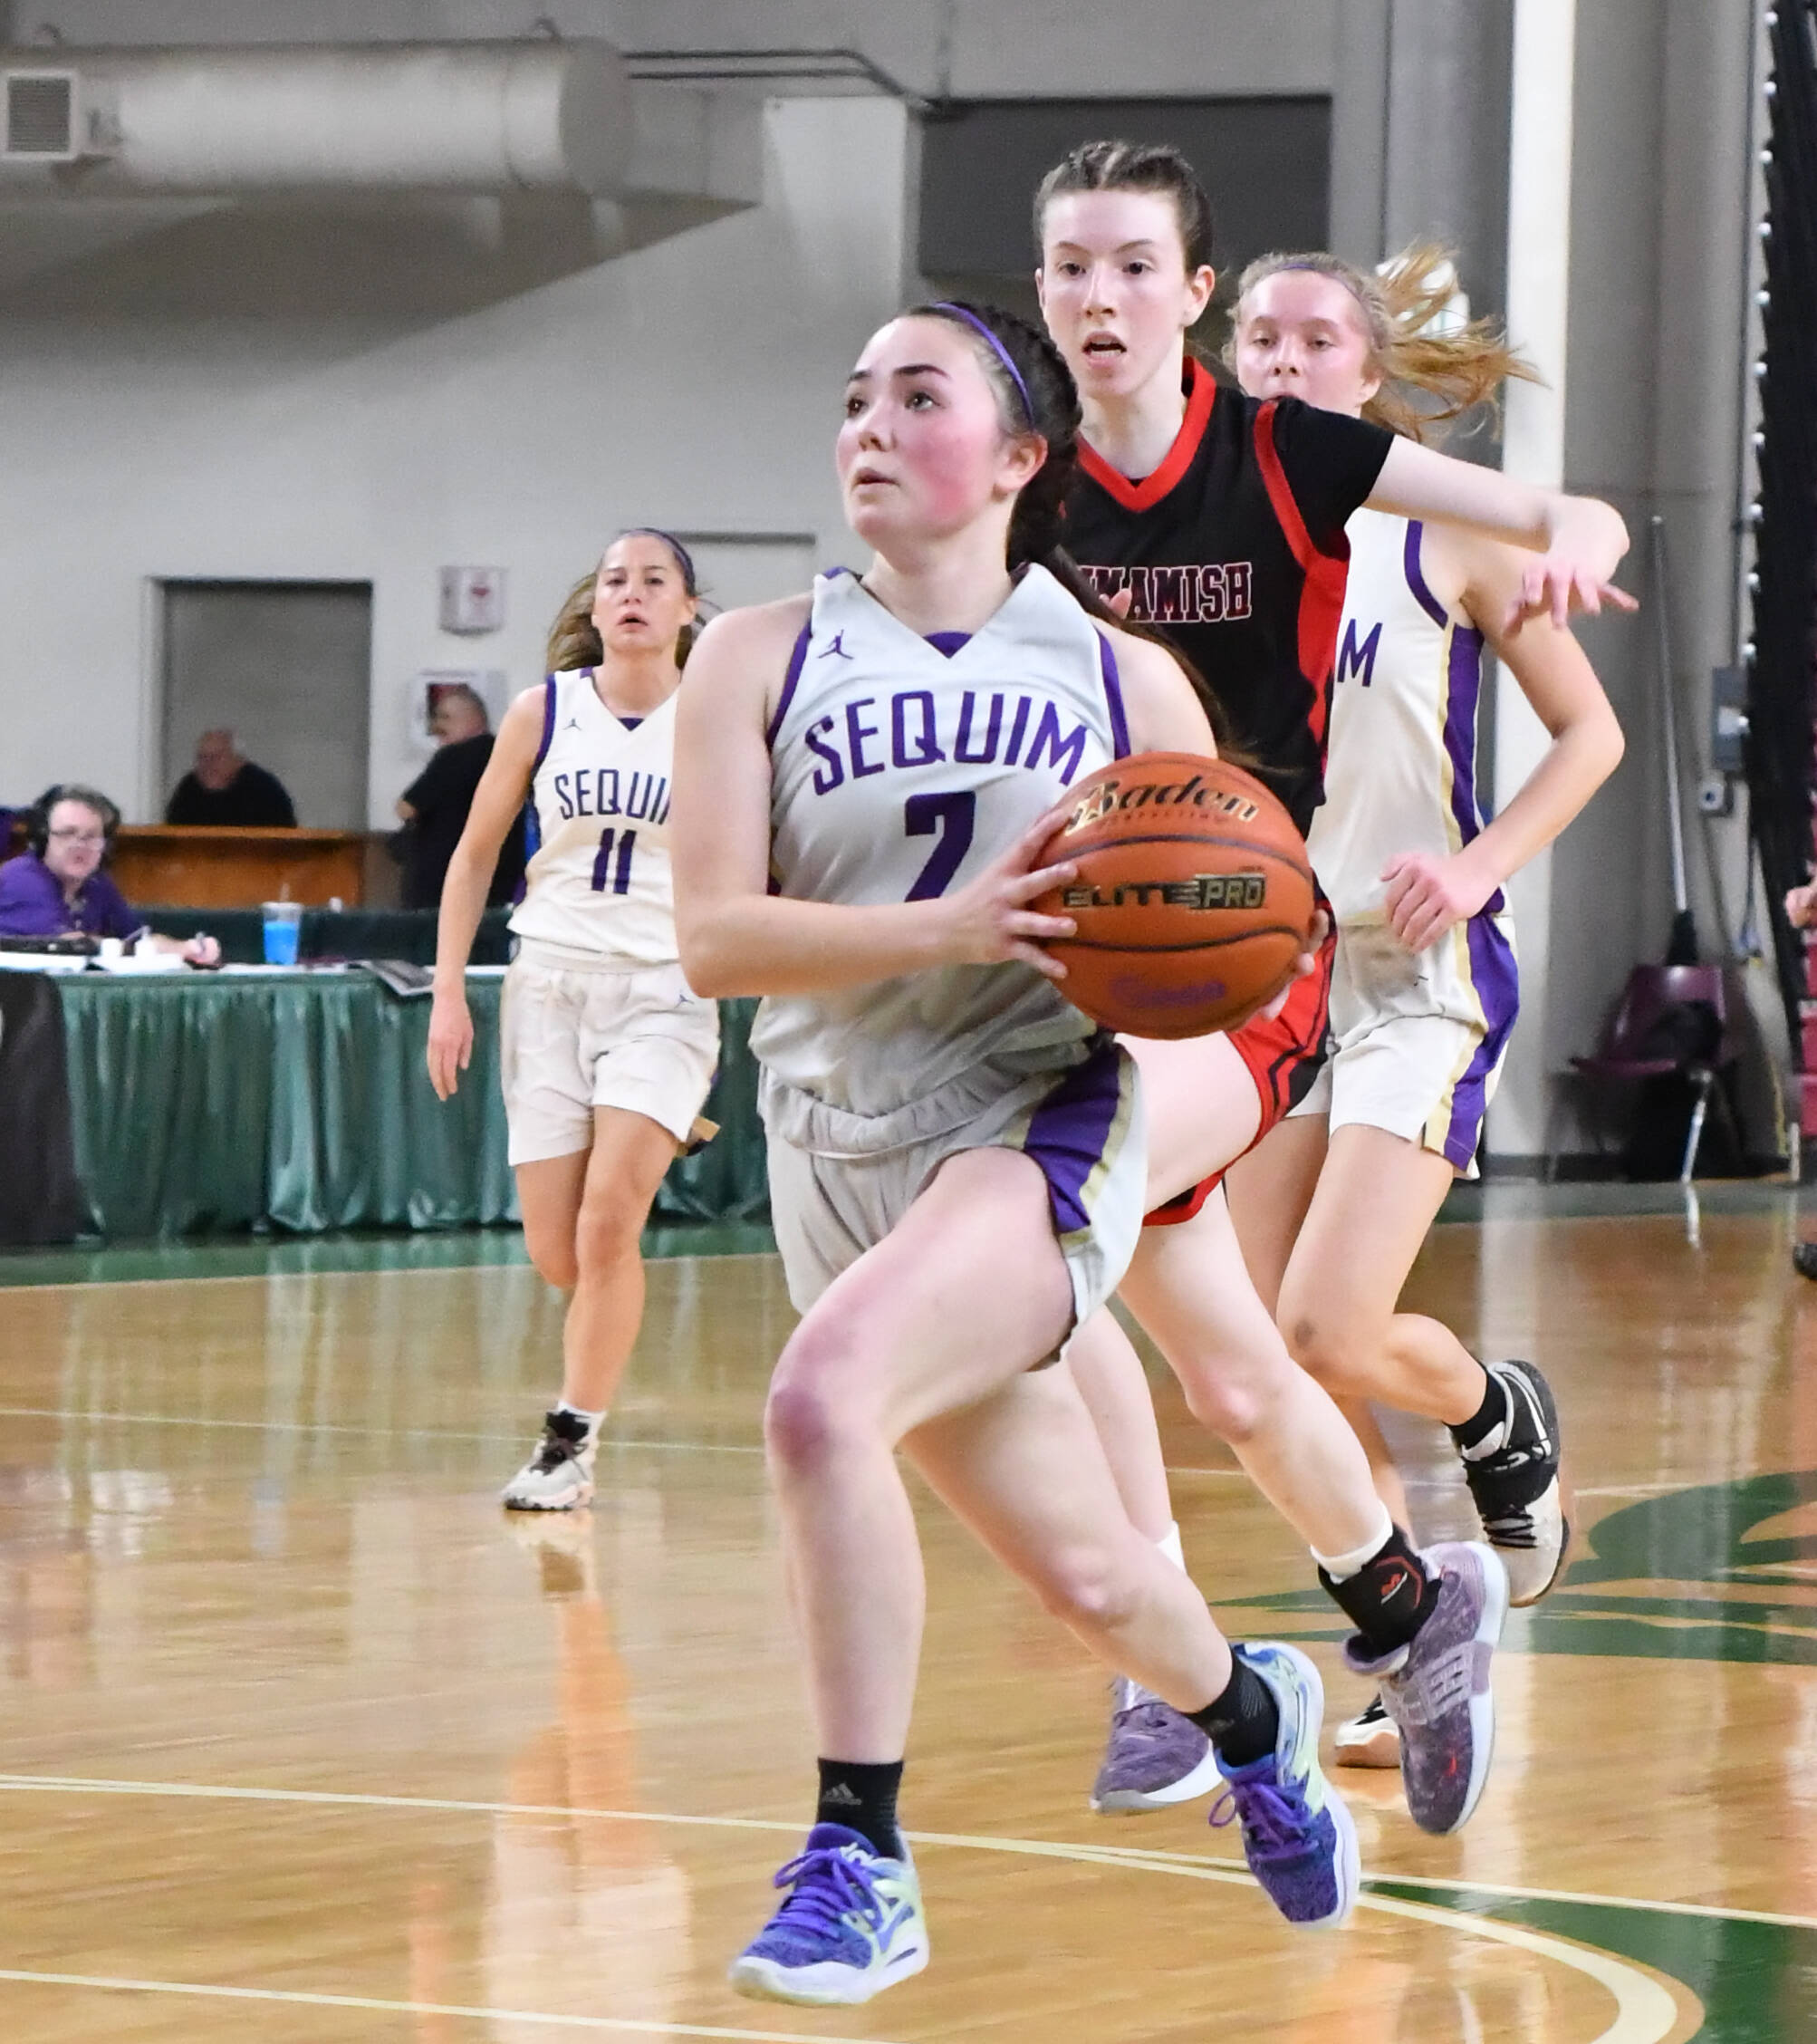 Photo by Jim Heintz / Sequim’s Hannah Bates leads a fastbreak in the first half of SHS’s 57-37 win over Sammamish at the class 2A state tournament in Yakima in March. Bates joins SHS teammate Jelissa Julmist on the Peninsula Pirates squad this winter.